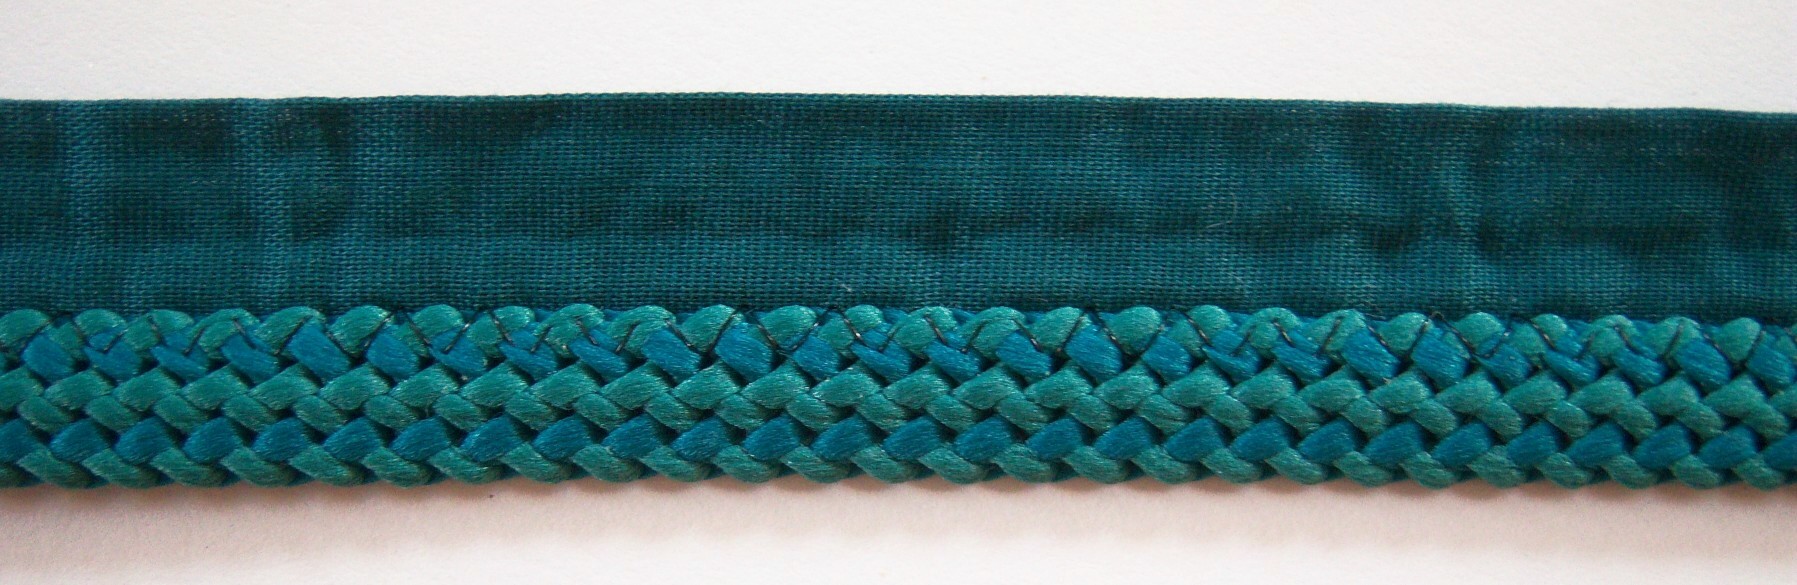 Teal/Blue 3/8" Piping